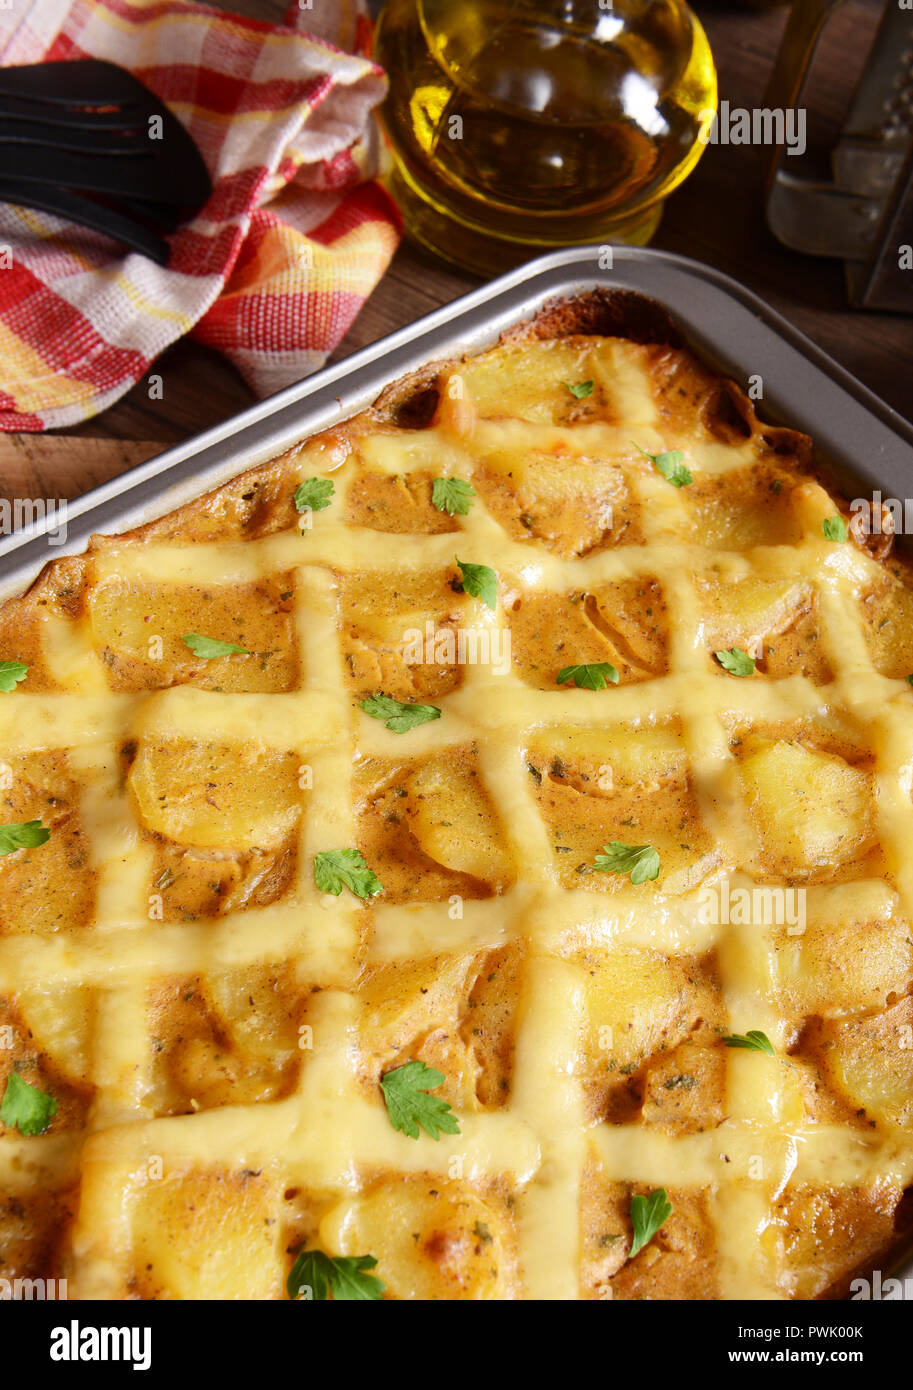 Casserole with potatoes, cheese and meat Stock Photo